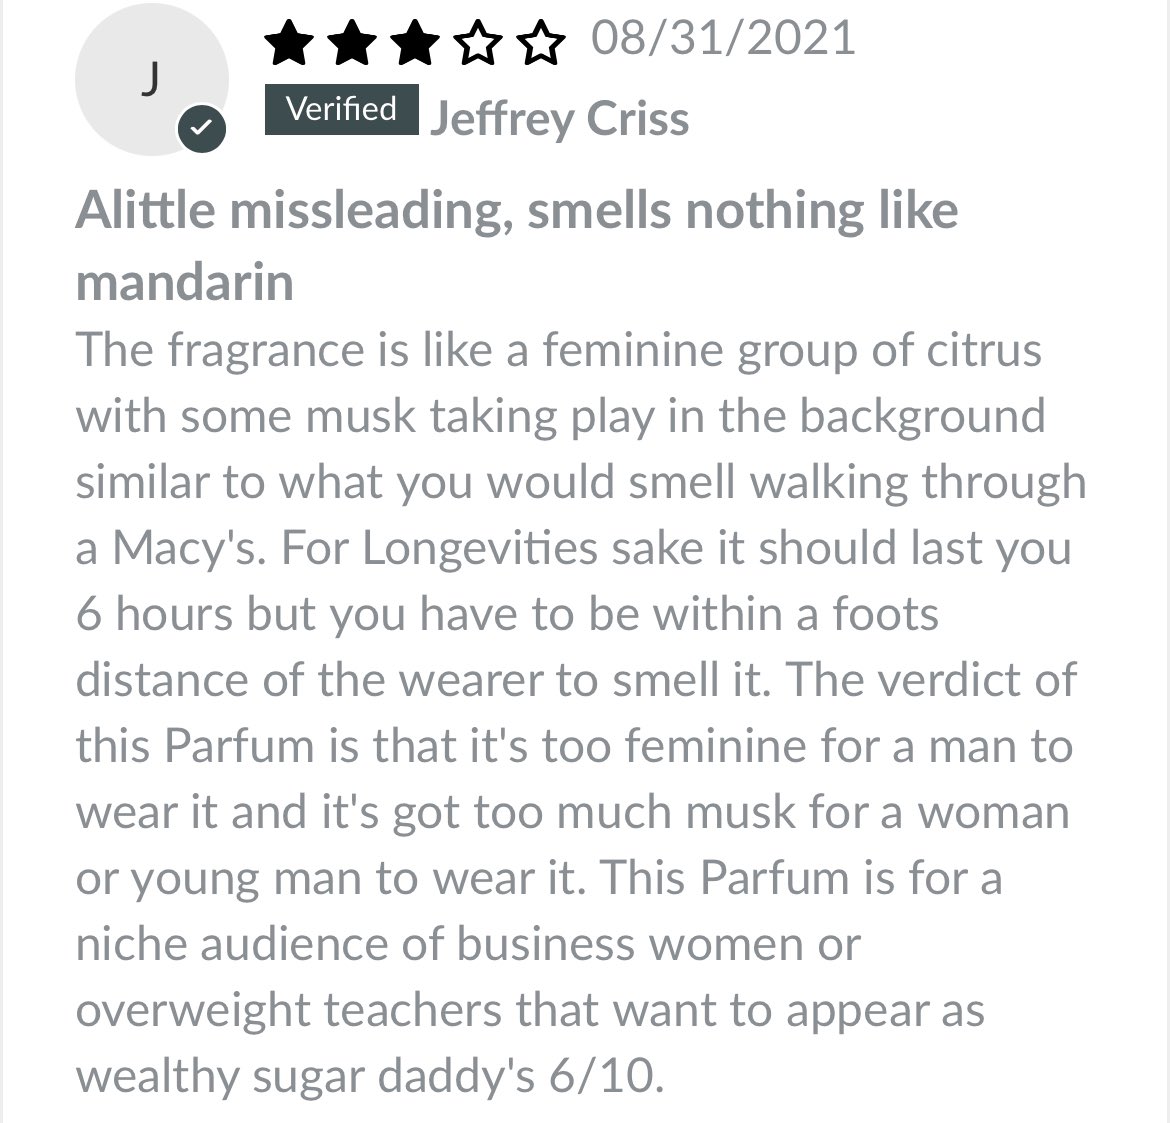 They hated this perfume but still gave it 3 stars/6 out of 10?